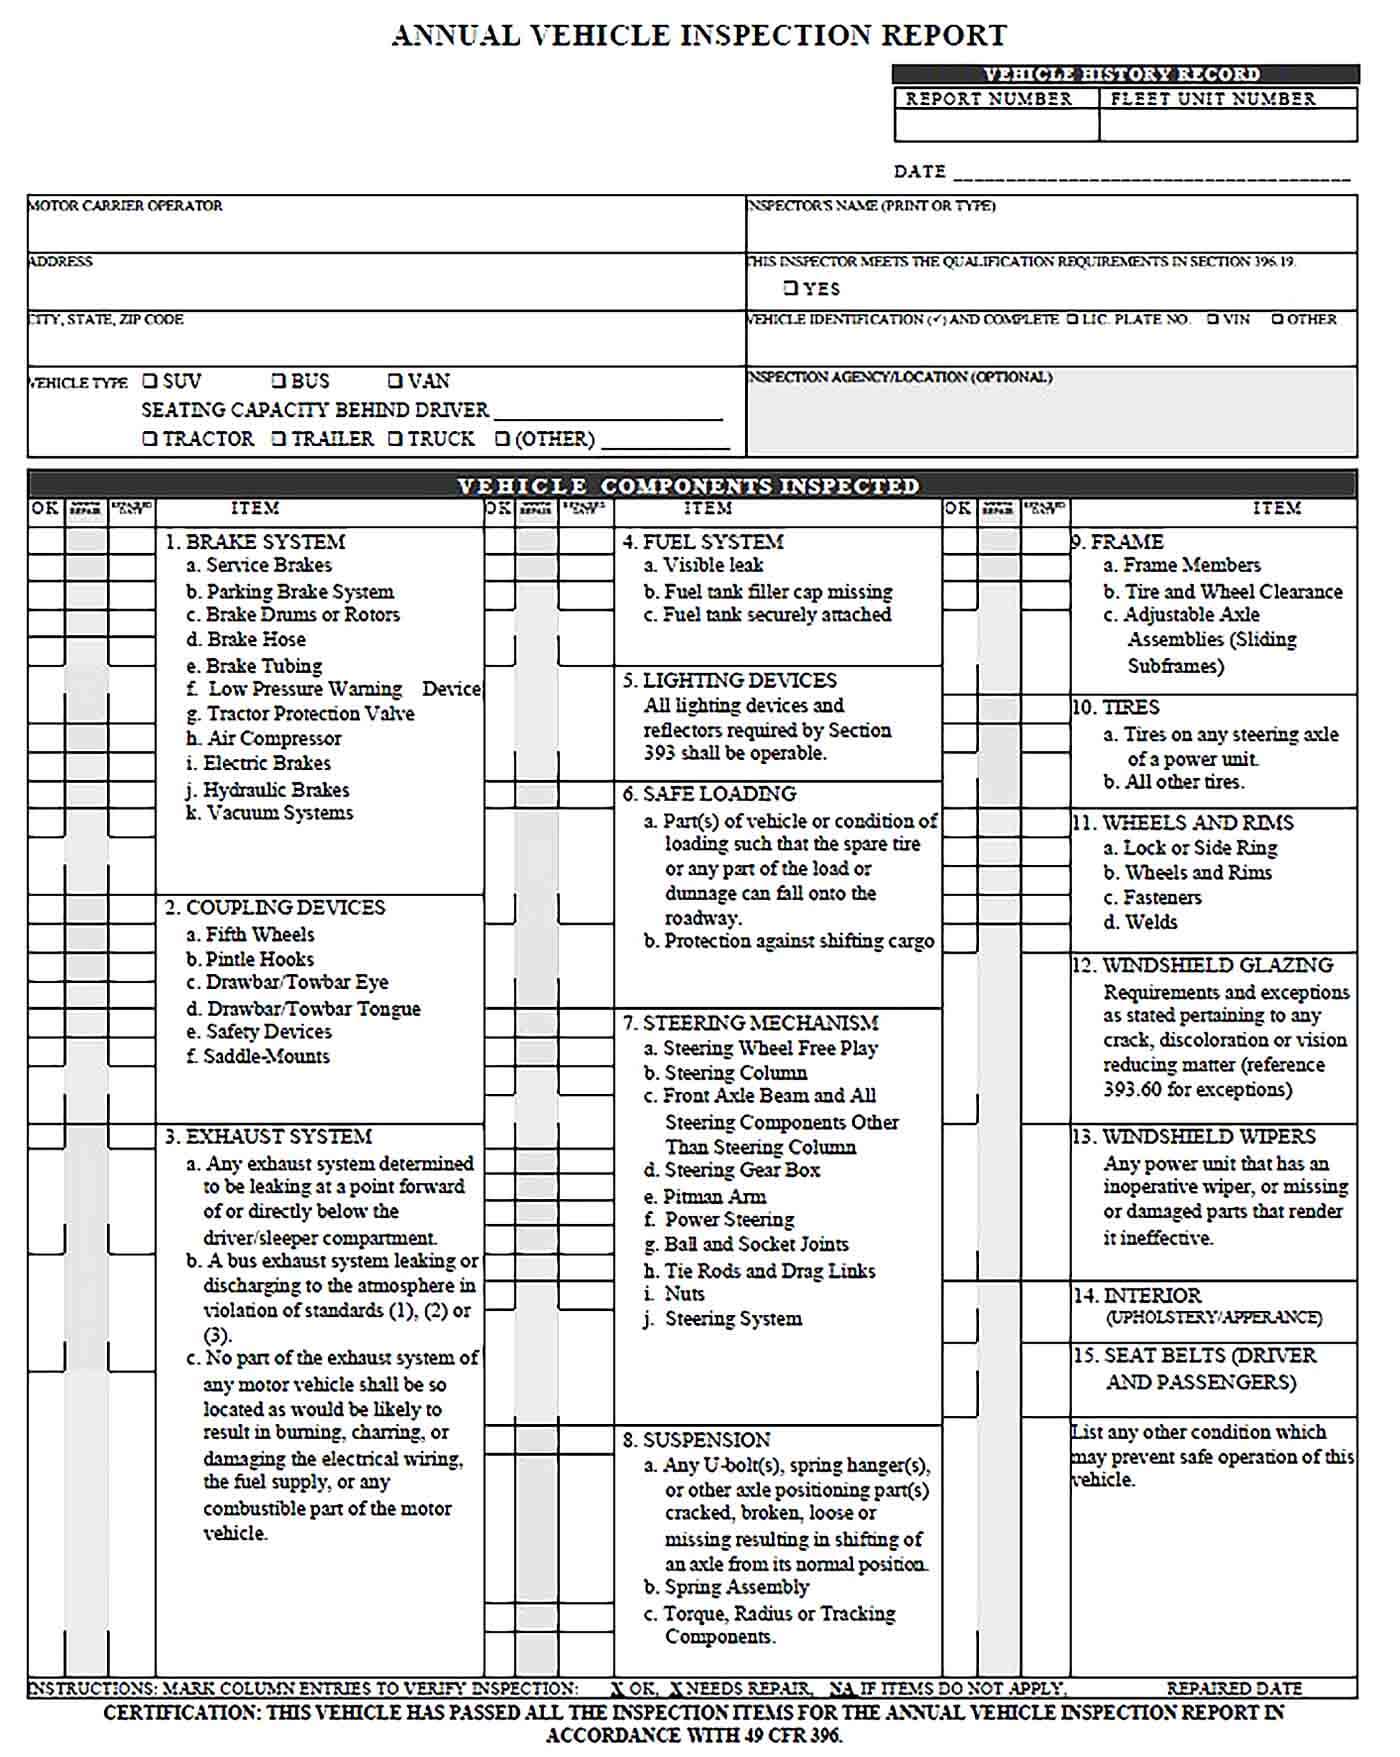 Sample Annual Vehicle Inspection Report Template